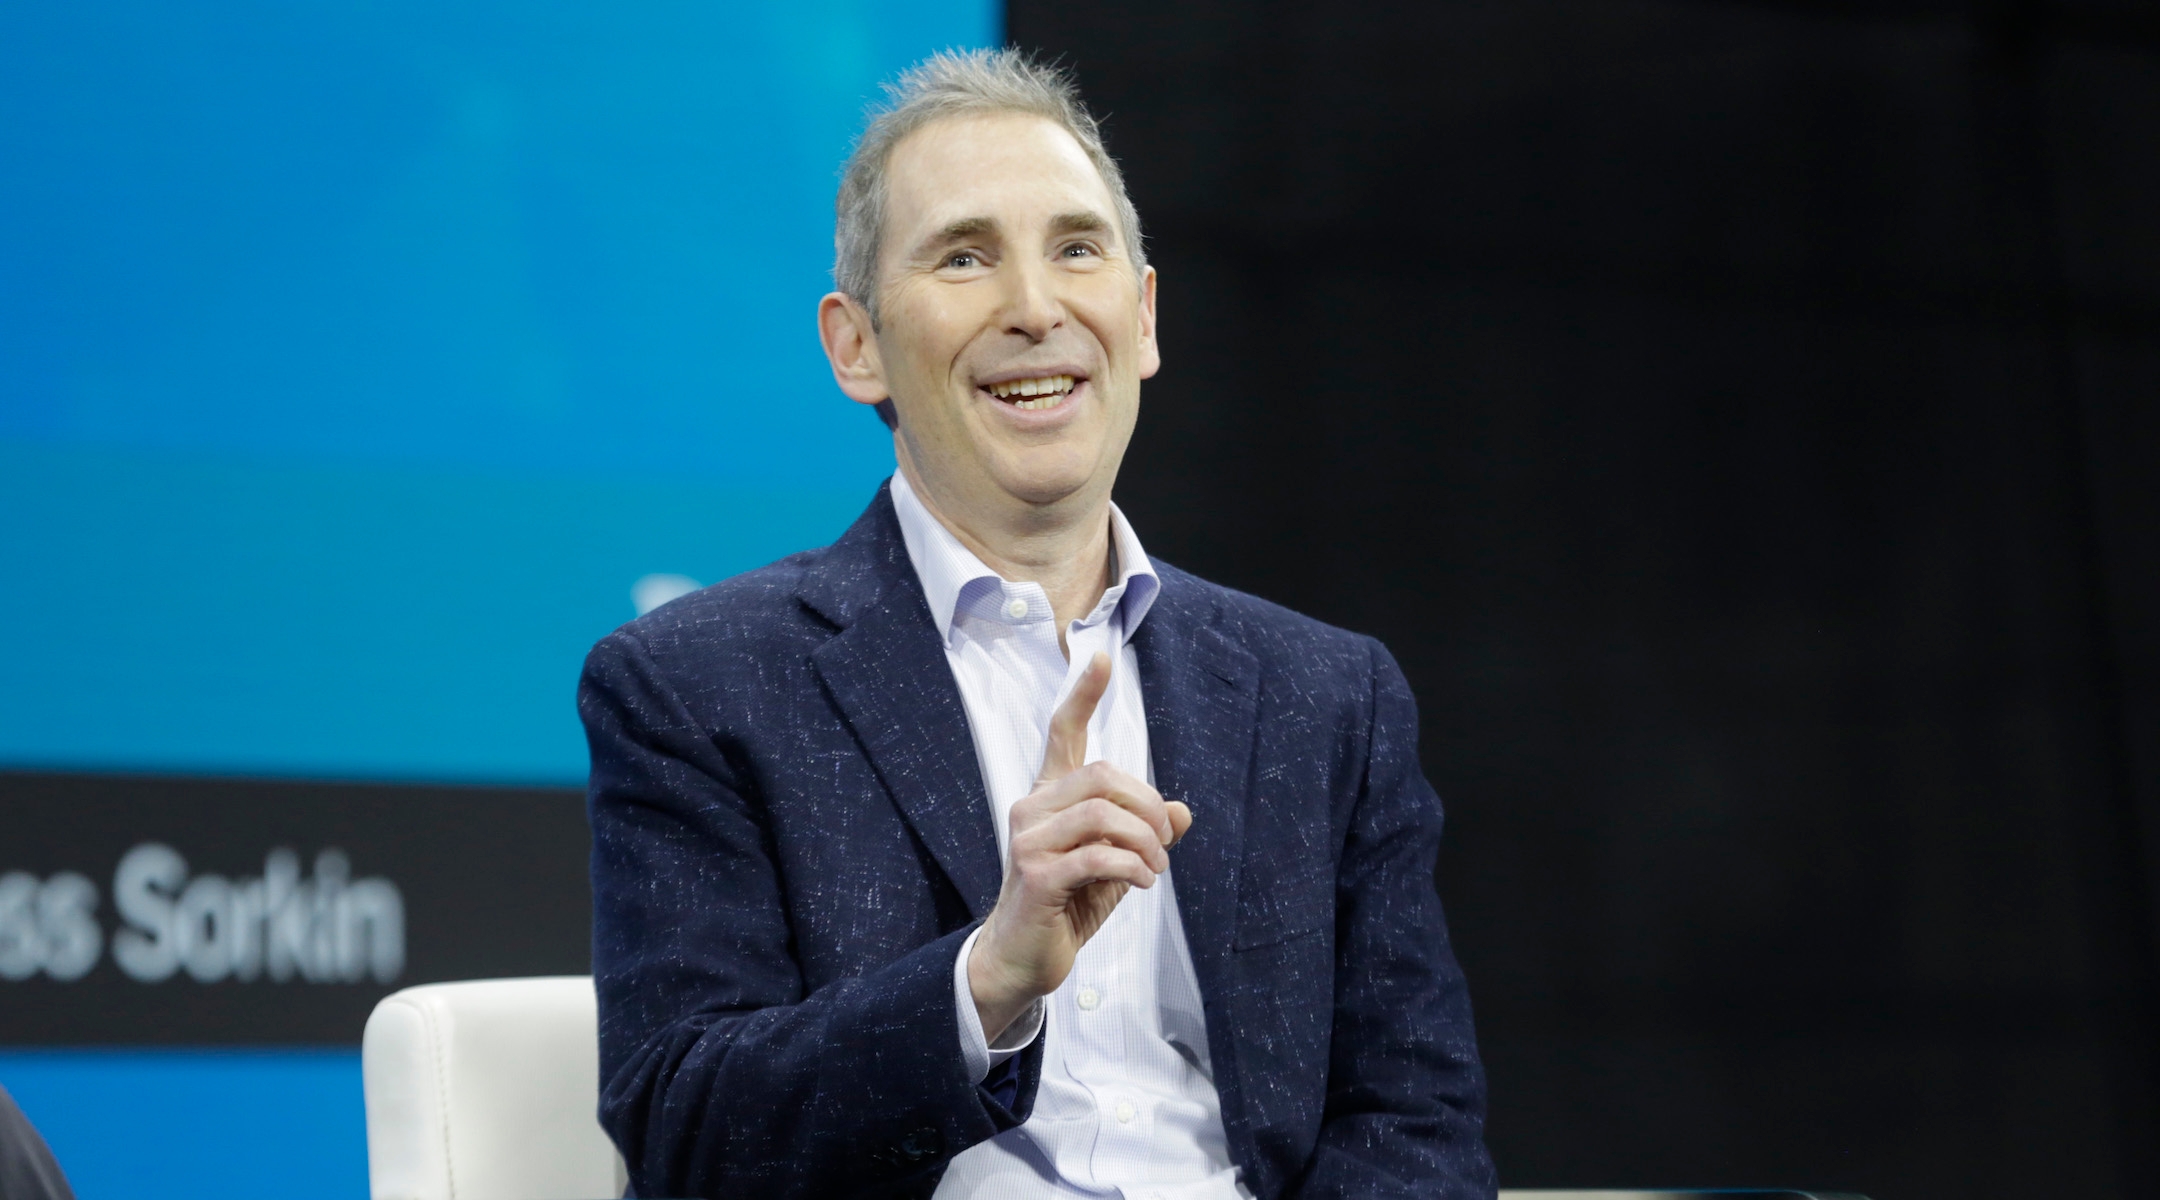 Amazon CEO Andy Jassy on stage at the 2022 New York Times DealBook conference on November 30, 2022 in New York City. (Thos Robinson/Getty Images for The New York Times)